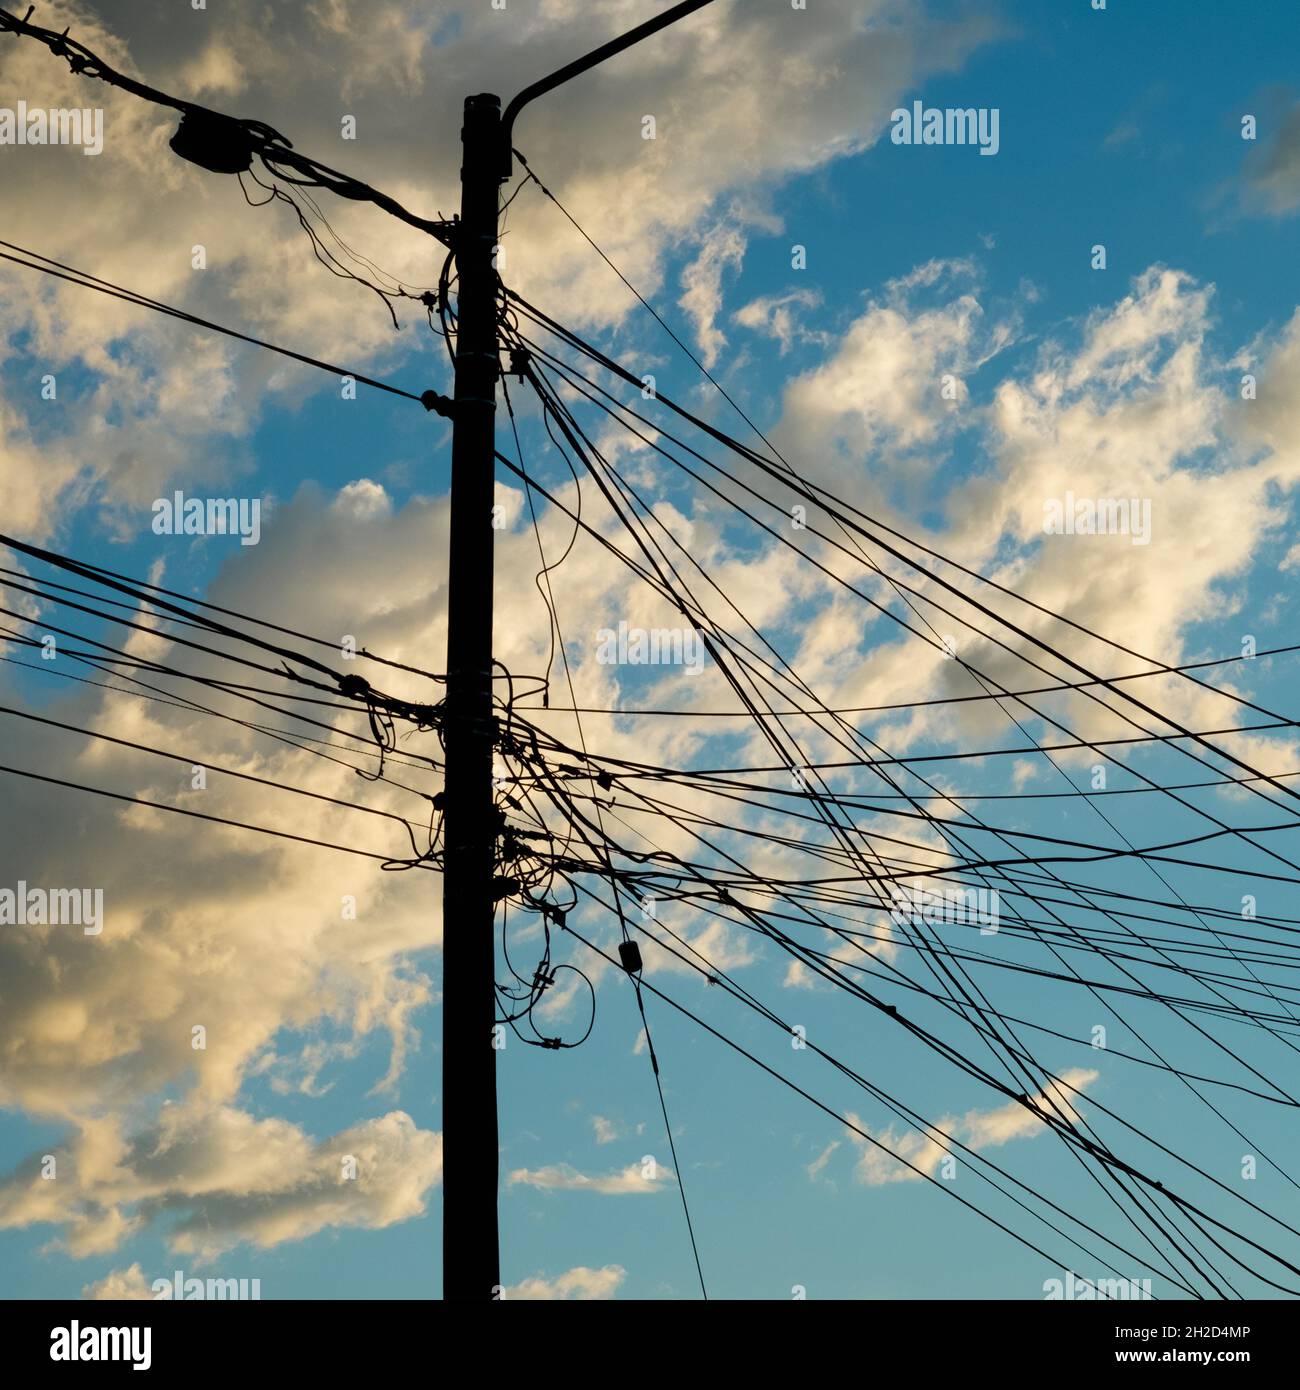 Pollution of cables against a clear sky and white clouds, somewere in Colombia. Stock Photo